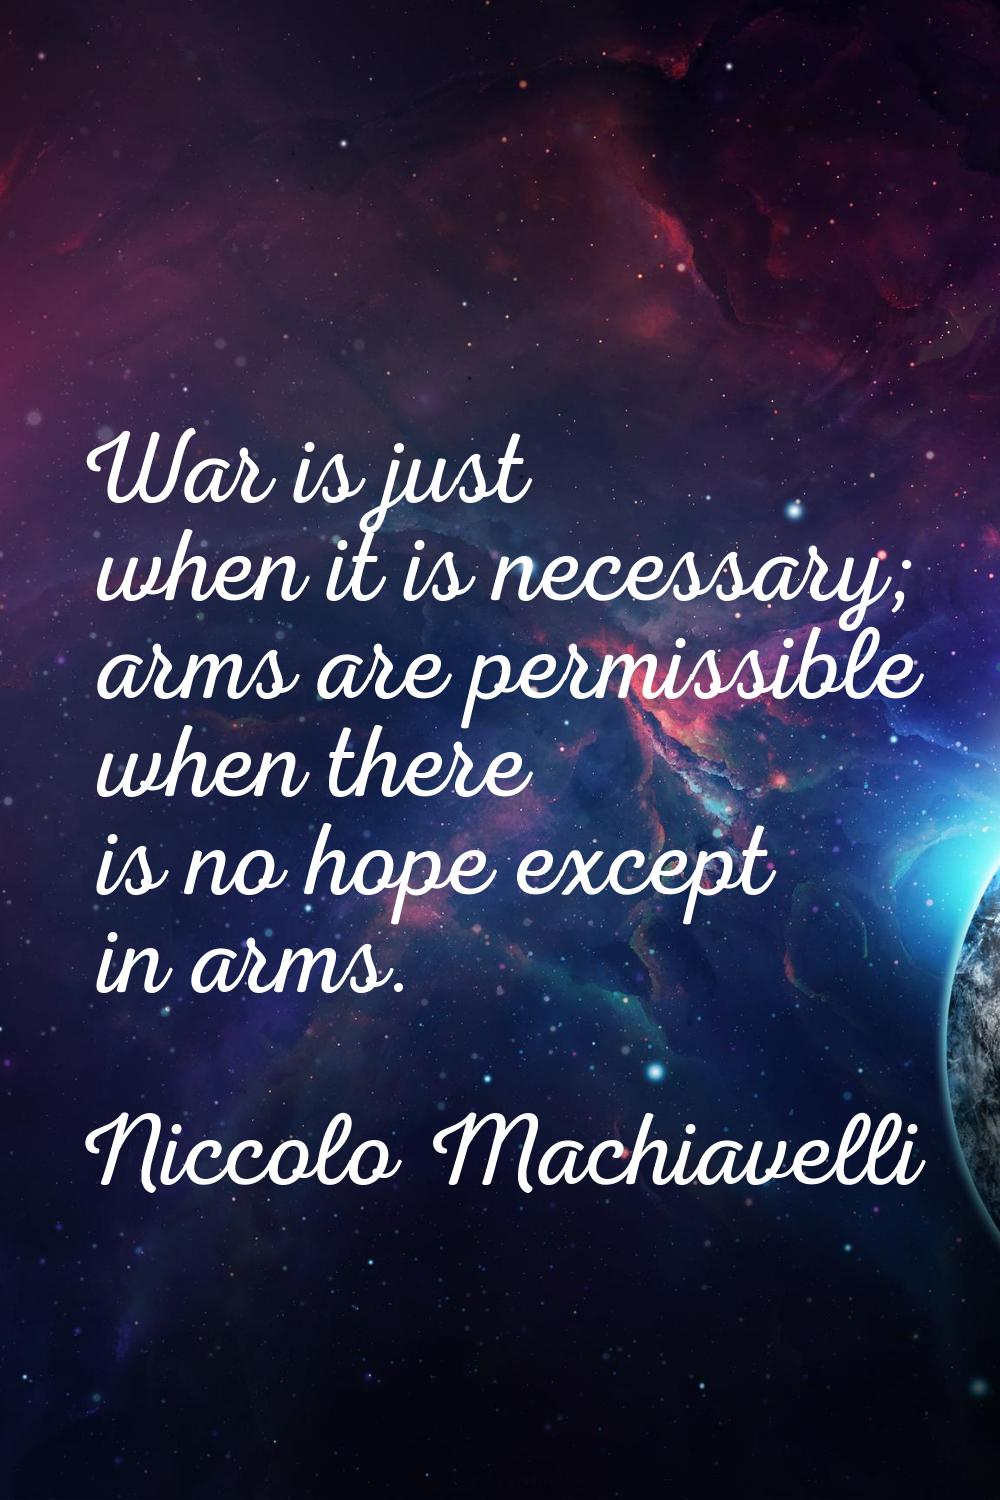 War is just when it is necessary; arms are permissible when there is no hope except in arms.